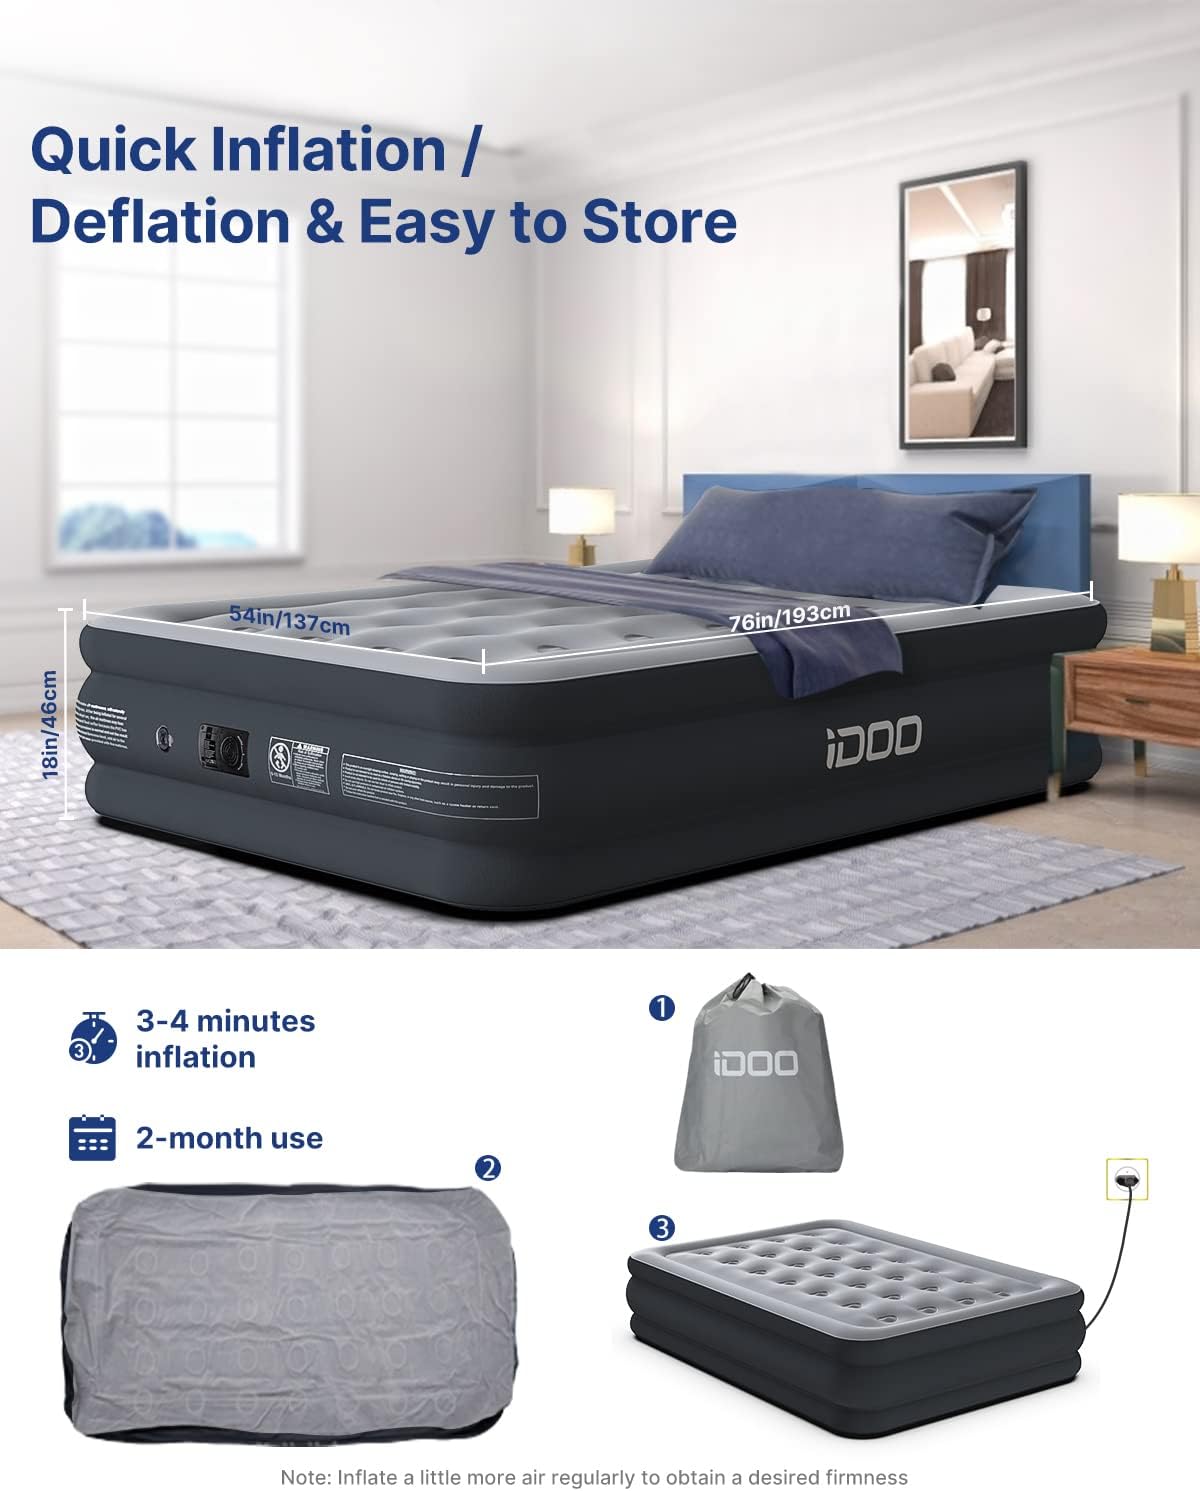 Queen 19" Inflatable Airbed with Built-in Pump - _wf_cus Air Bed BFD CA queen by idoo